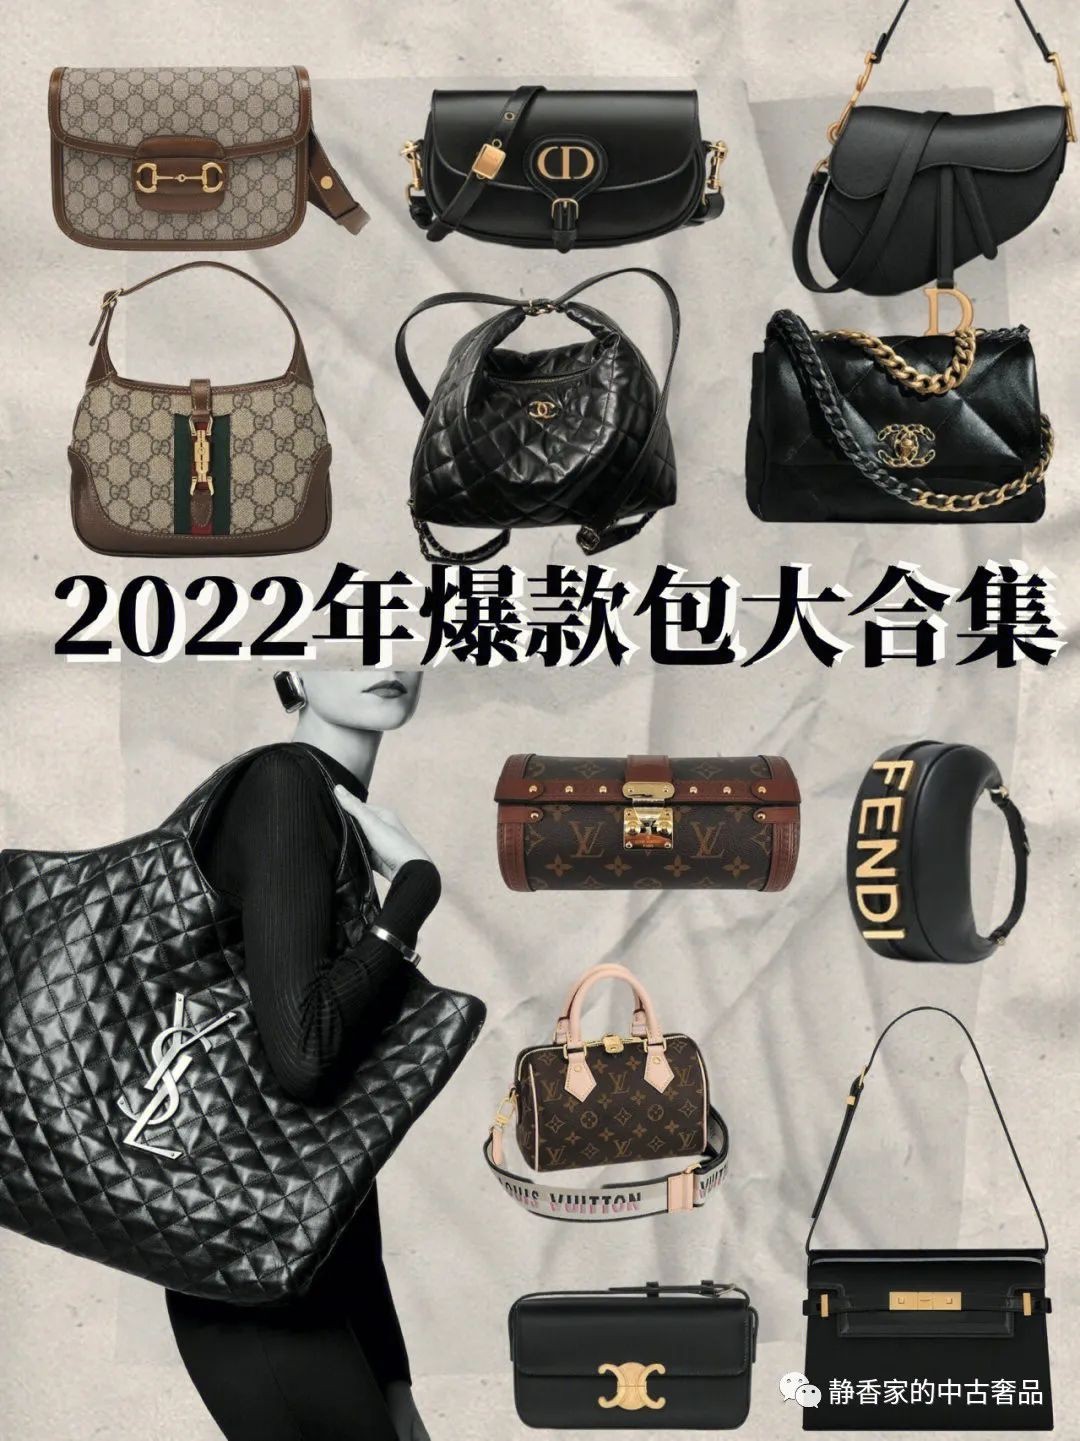 Global most popular collection of designer bags with top replica links (October 2022)-Best Quality Fake designer Bag Review, Replica designer bag ru